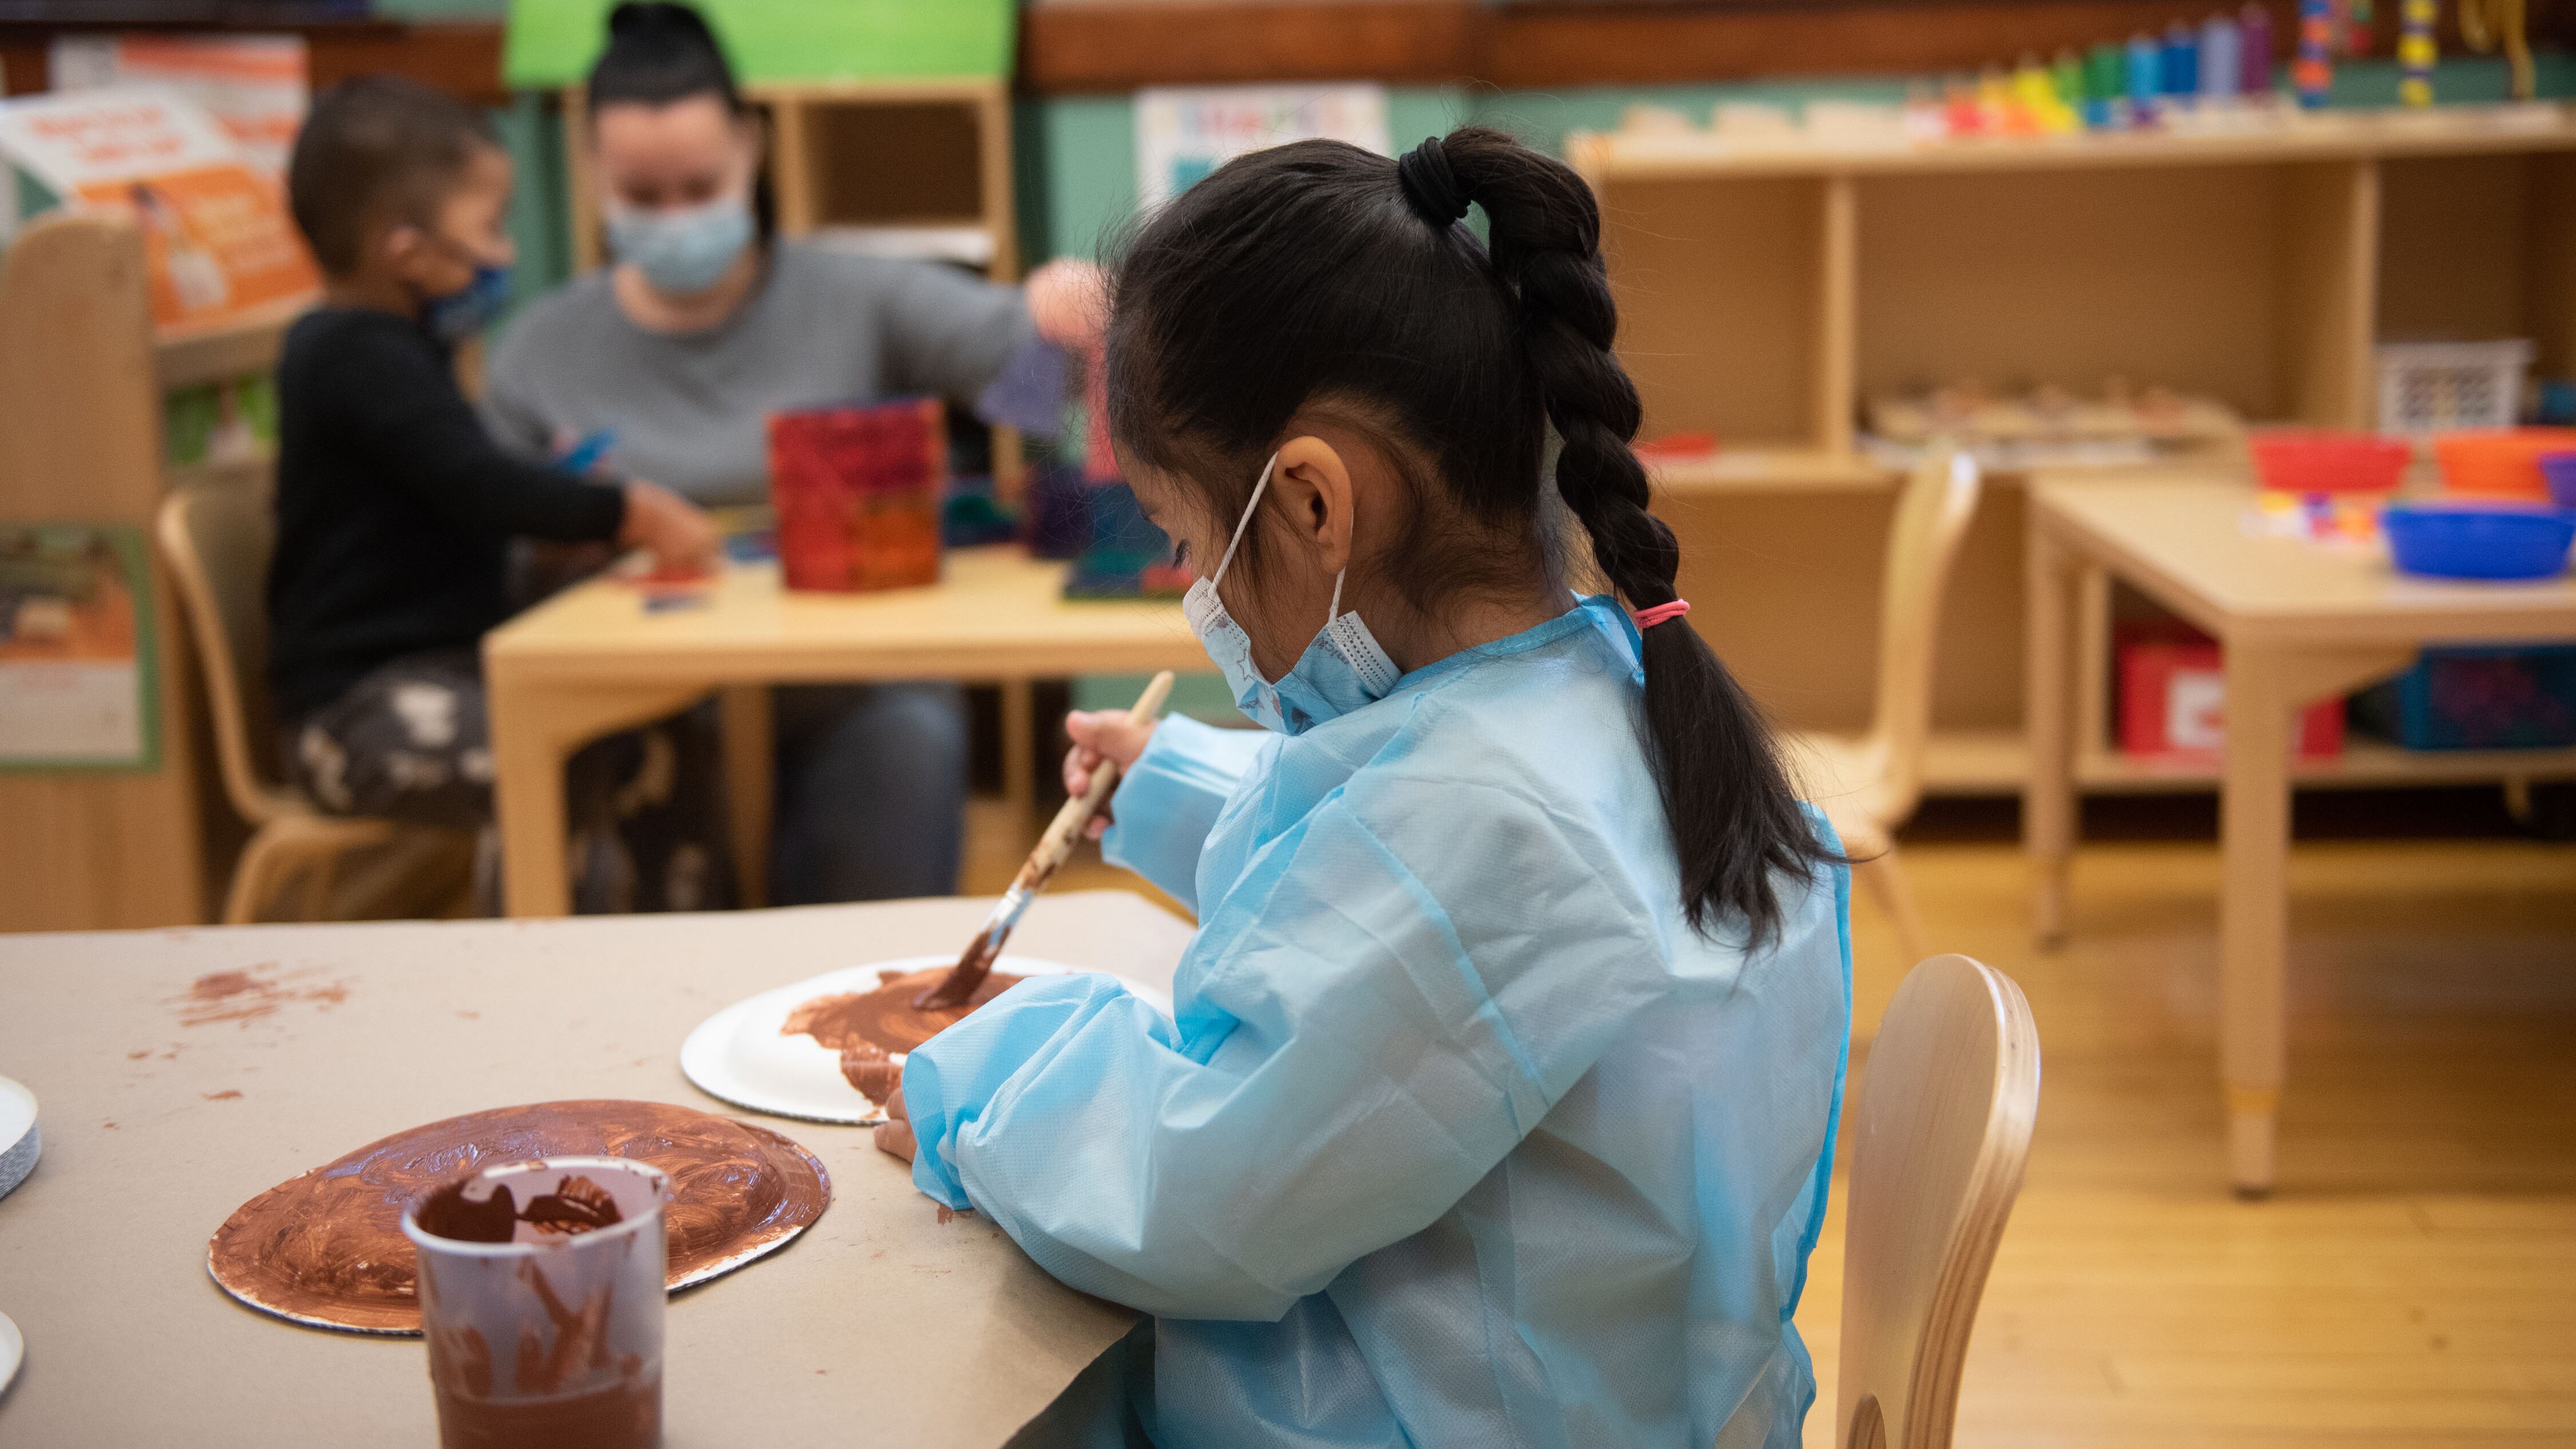 A student wearing a mask on her face and a blue smock to cover her clothes uses brown paint on paper plates.